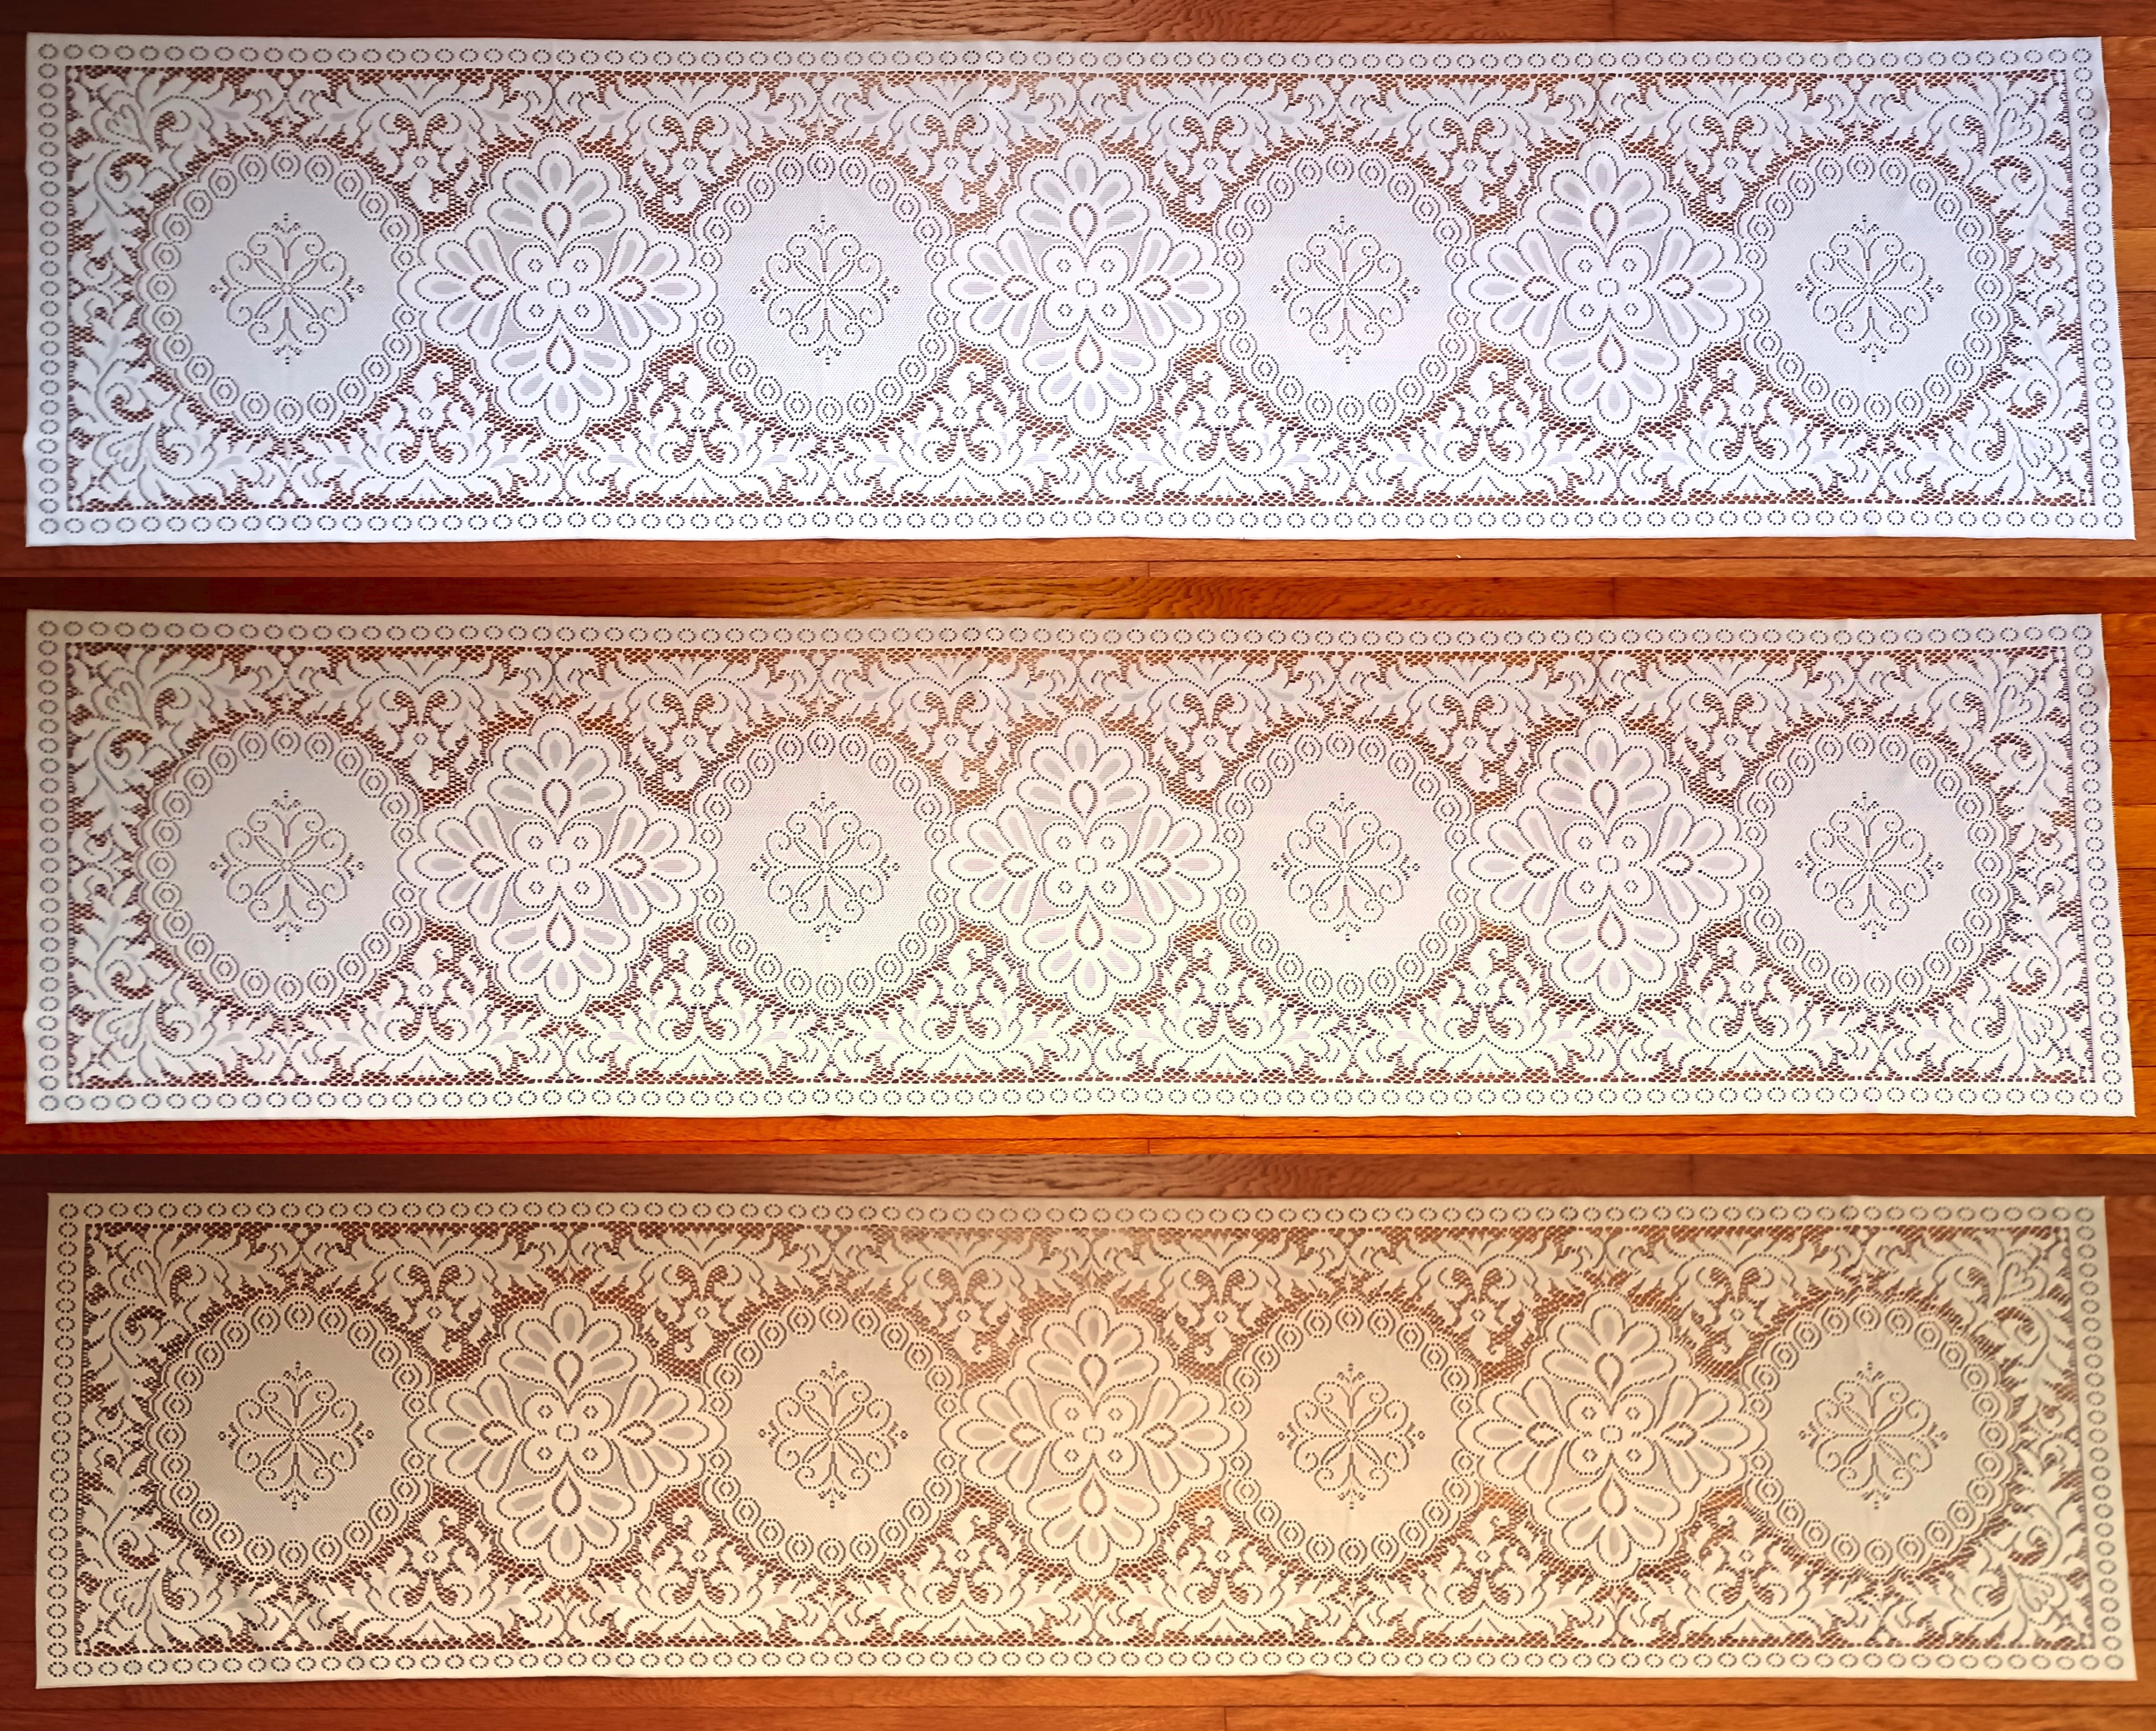 Lace 72" Table Runner